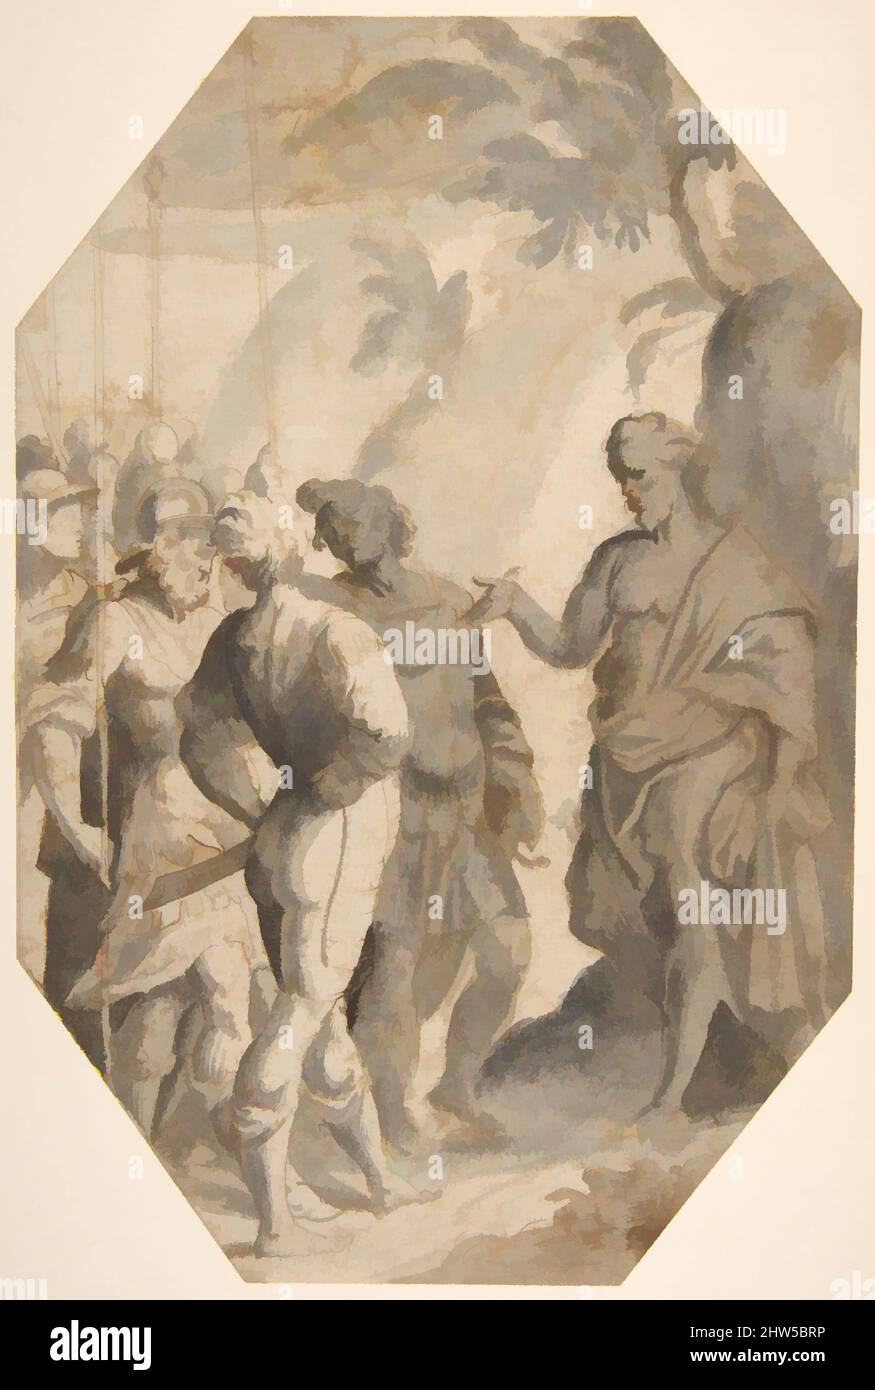 Art inspired by Saint John the Baptist (?) Preaching to a Group of Soldiers, 16th century, Pen and brown ink, brown and gray wash. Octagonal, 10-1/4 x 6-13/16 in. (26.0 x 17.3 cm), Drawings, Giovanni Battista Trotti ('Il Malosso') (Italian, Cremona 1556–1619 Parma), attributed to, Classic works modernized by Artotop with a splash of modernity. Shapes, color and value, eye-catching visual impact on art. Emotions through freedom of artworks in a contemporary way. A timeless message pursuing a wildly creative new direction. Artists turning to the digital medium and creating the Artotop NFT Stock Photo